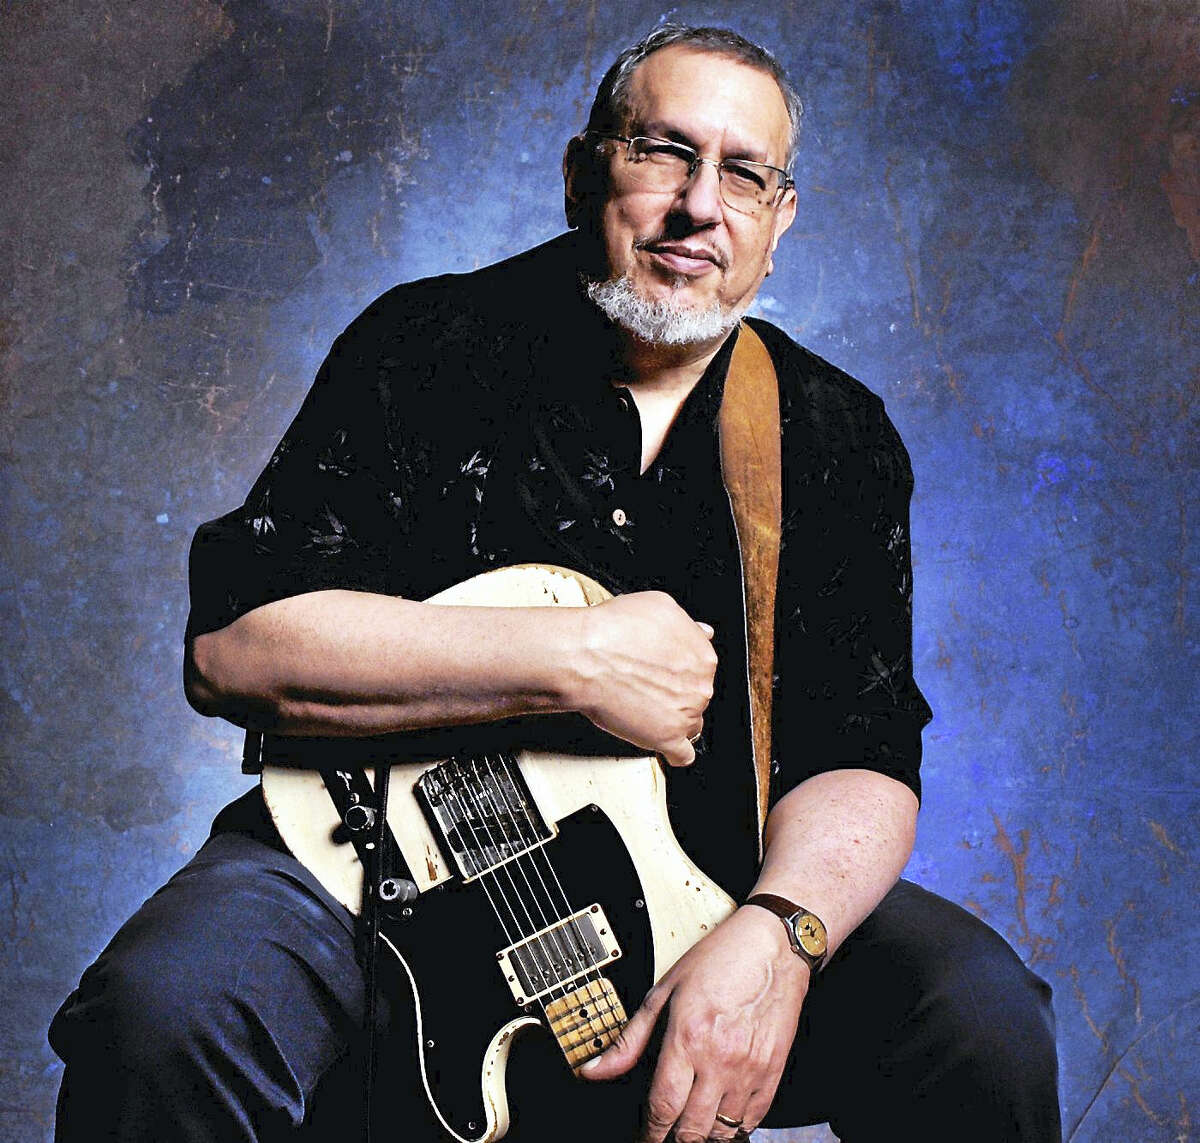 Contributed photoDave Bromberg returns for the fifth time to the Infinity Music Hall stage. To purchase tickets for his upcoming concert in Hartford on Saturday March 19, call the Infinity Hall box office at 866-666-6306 or go to www.infinityhall.com.